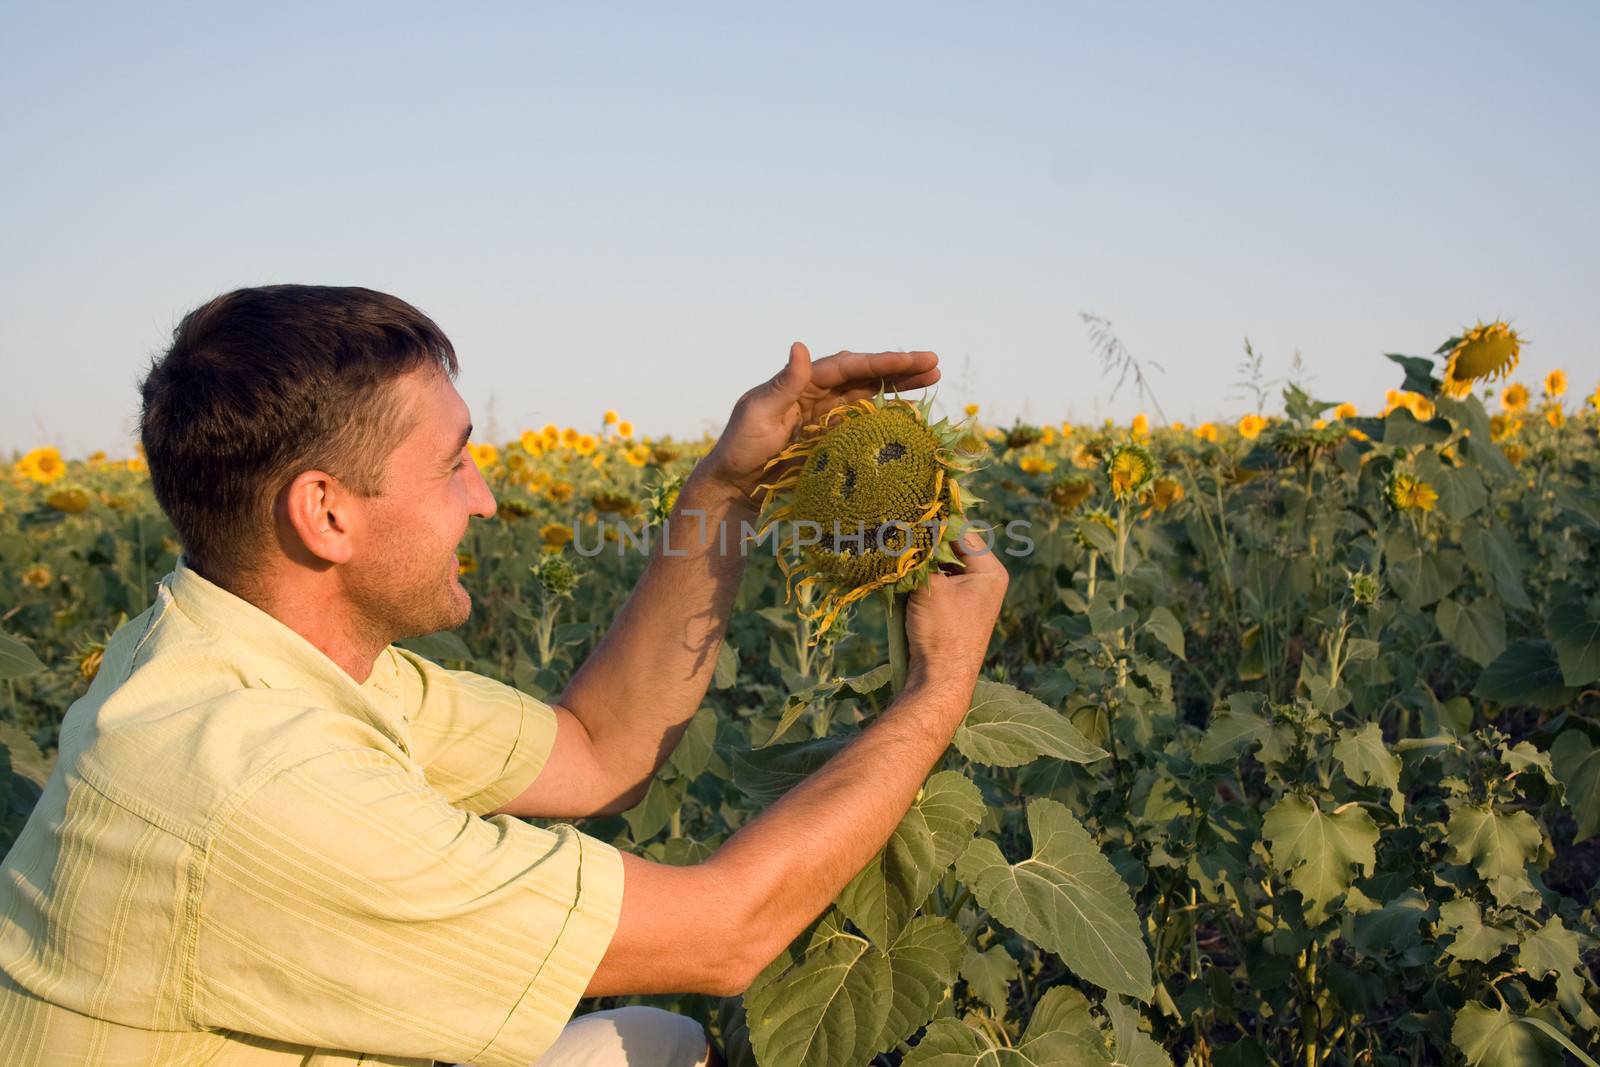 Man in the field with sunflowers smiling looking at sunflower